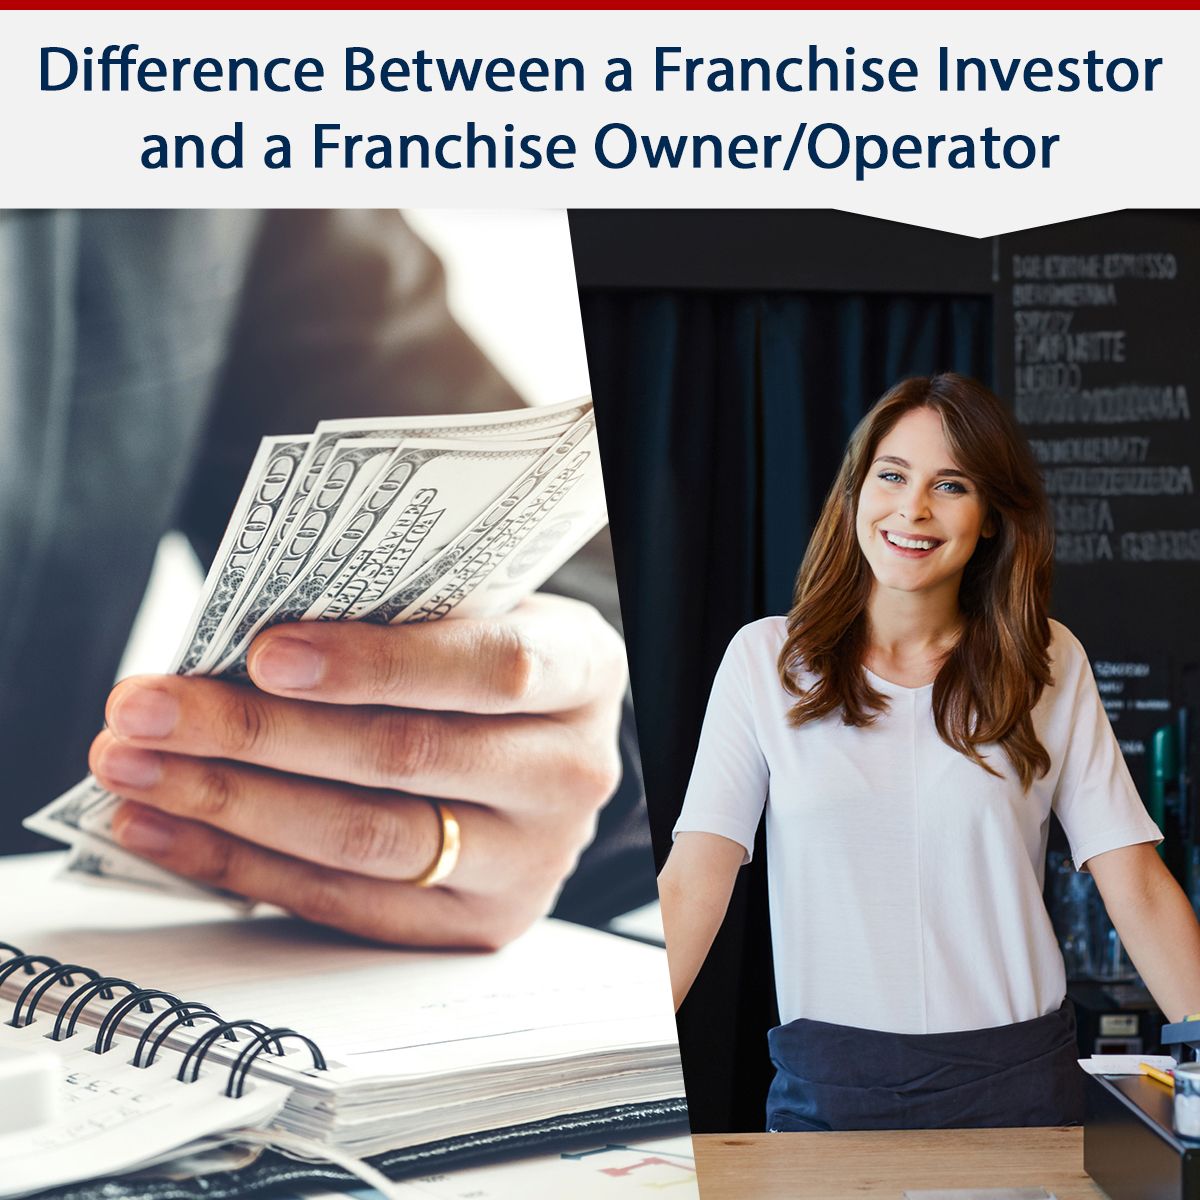 What Is the Difference Between a Franchise Investor and a Franchise Owner/Operator?